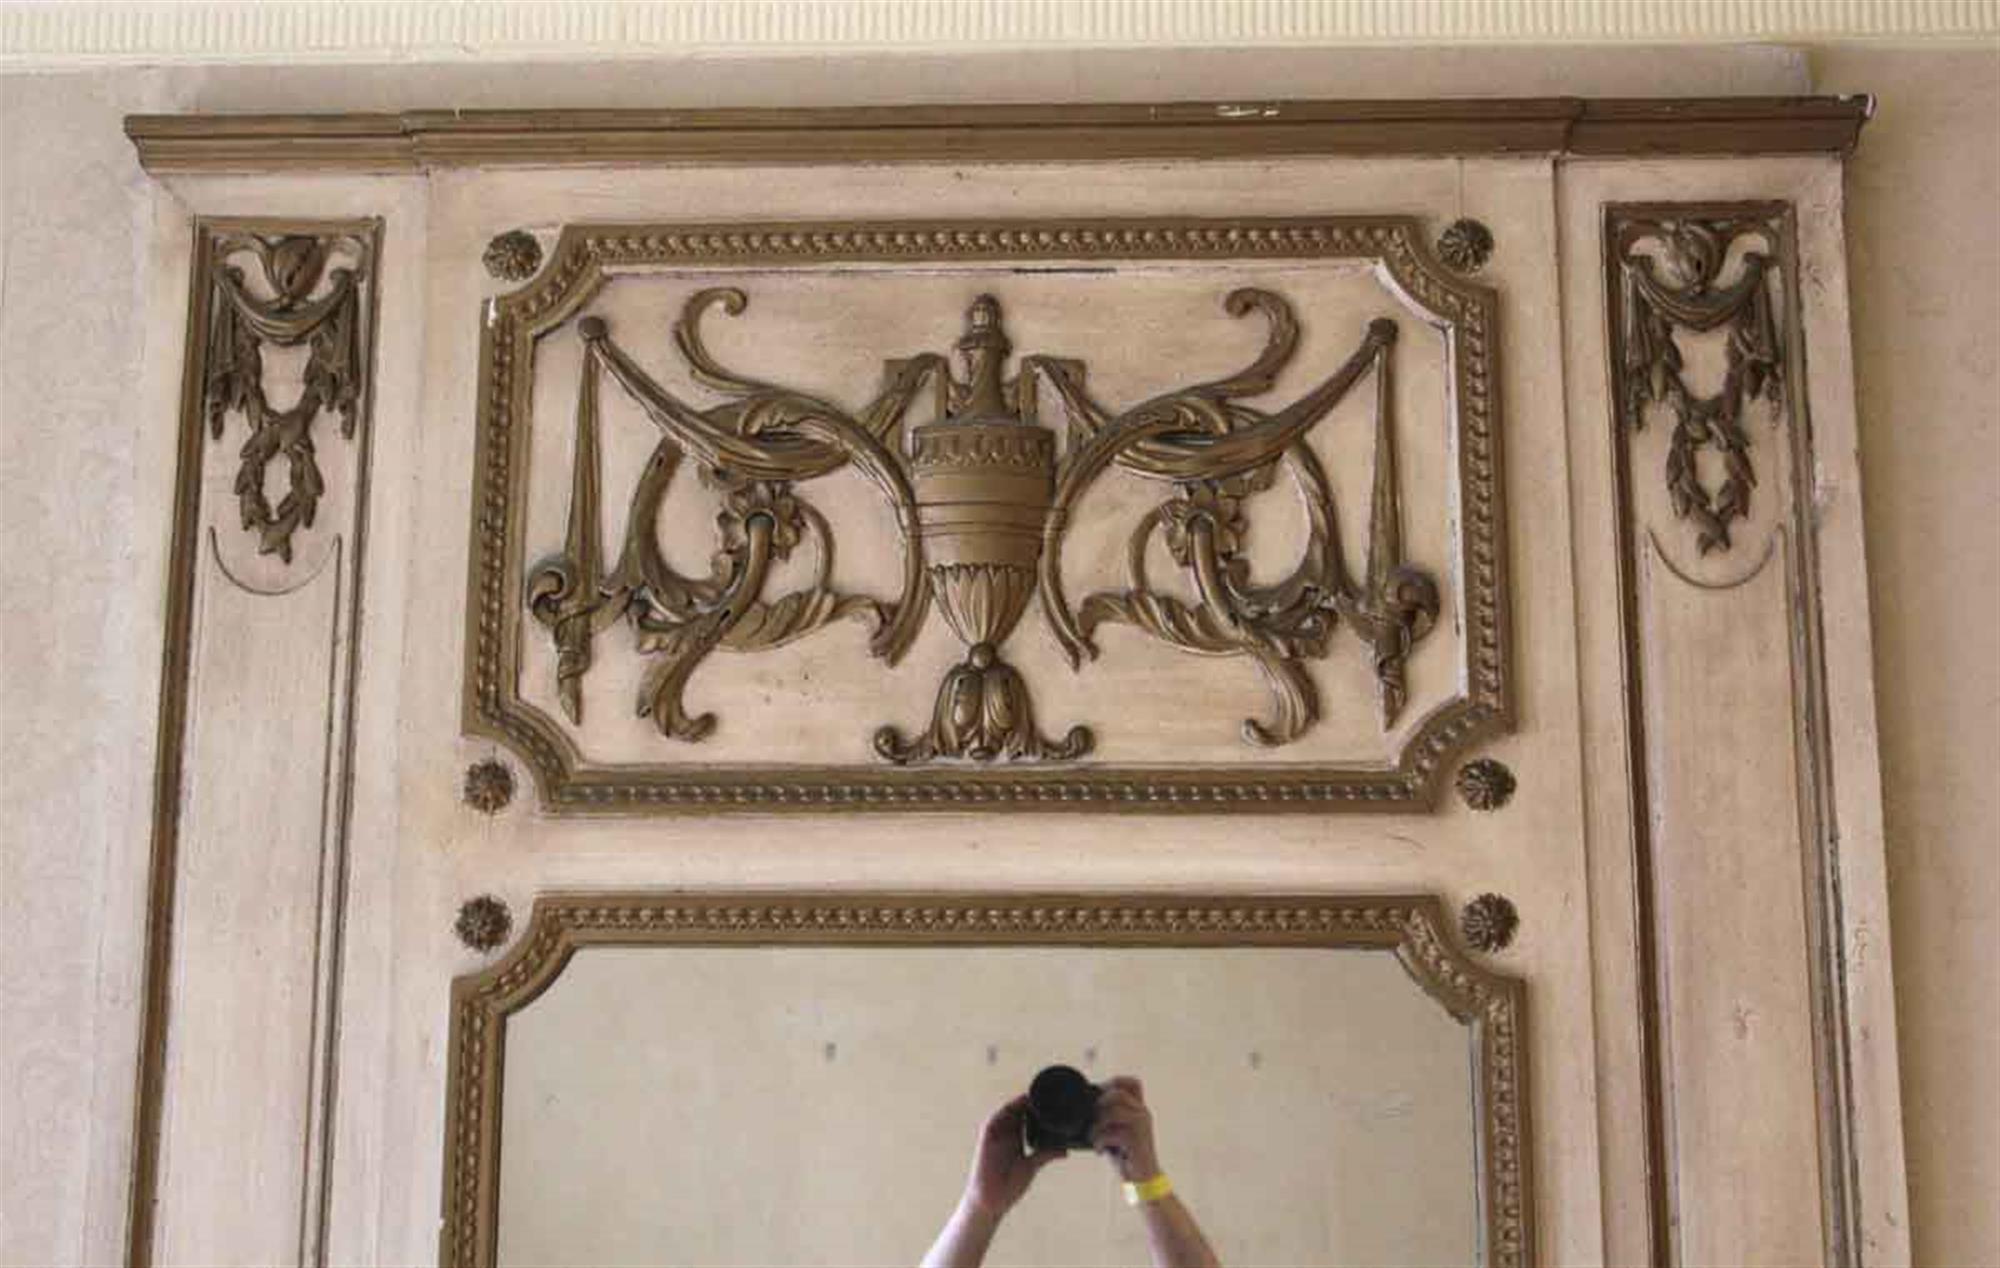 Decorative off white wooden over mantel mirror with carved details and an urn in the top center from 1931. Original to Room 865 of the NYC Waldorf Astoria Hotel. Waldorf Astoria authenticity card included with your purchase. Please note, this item